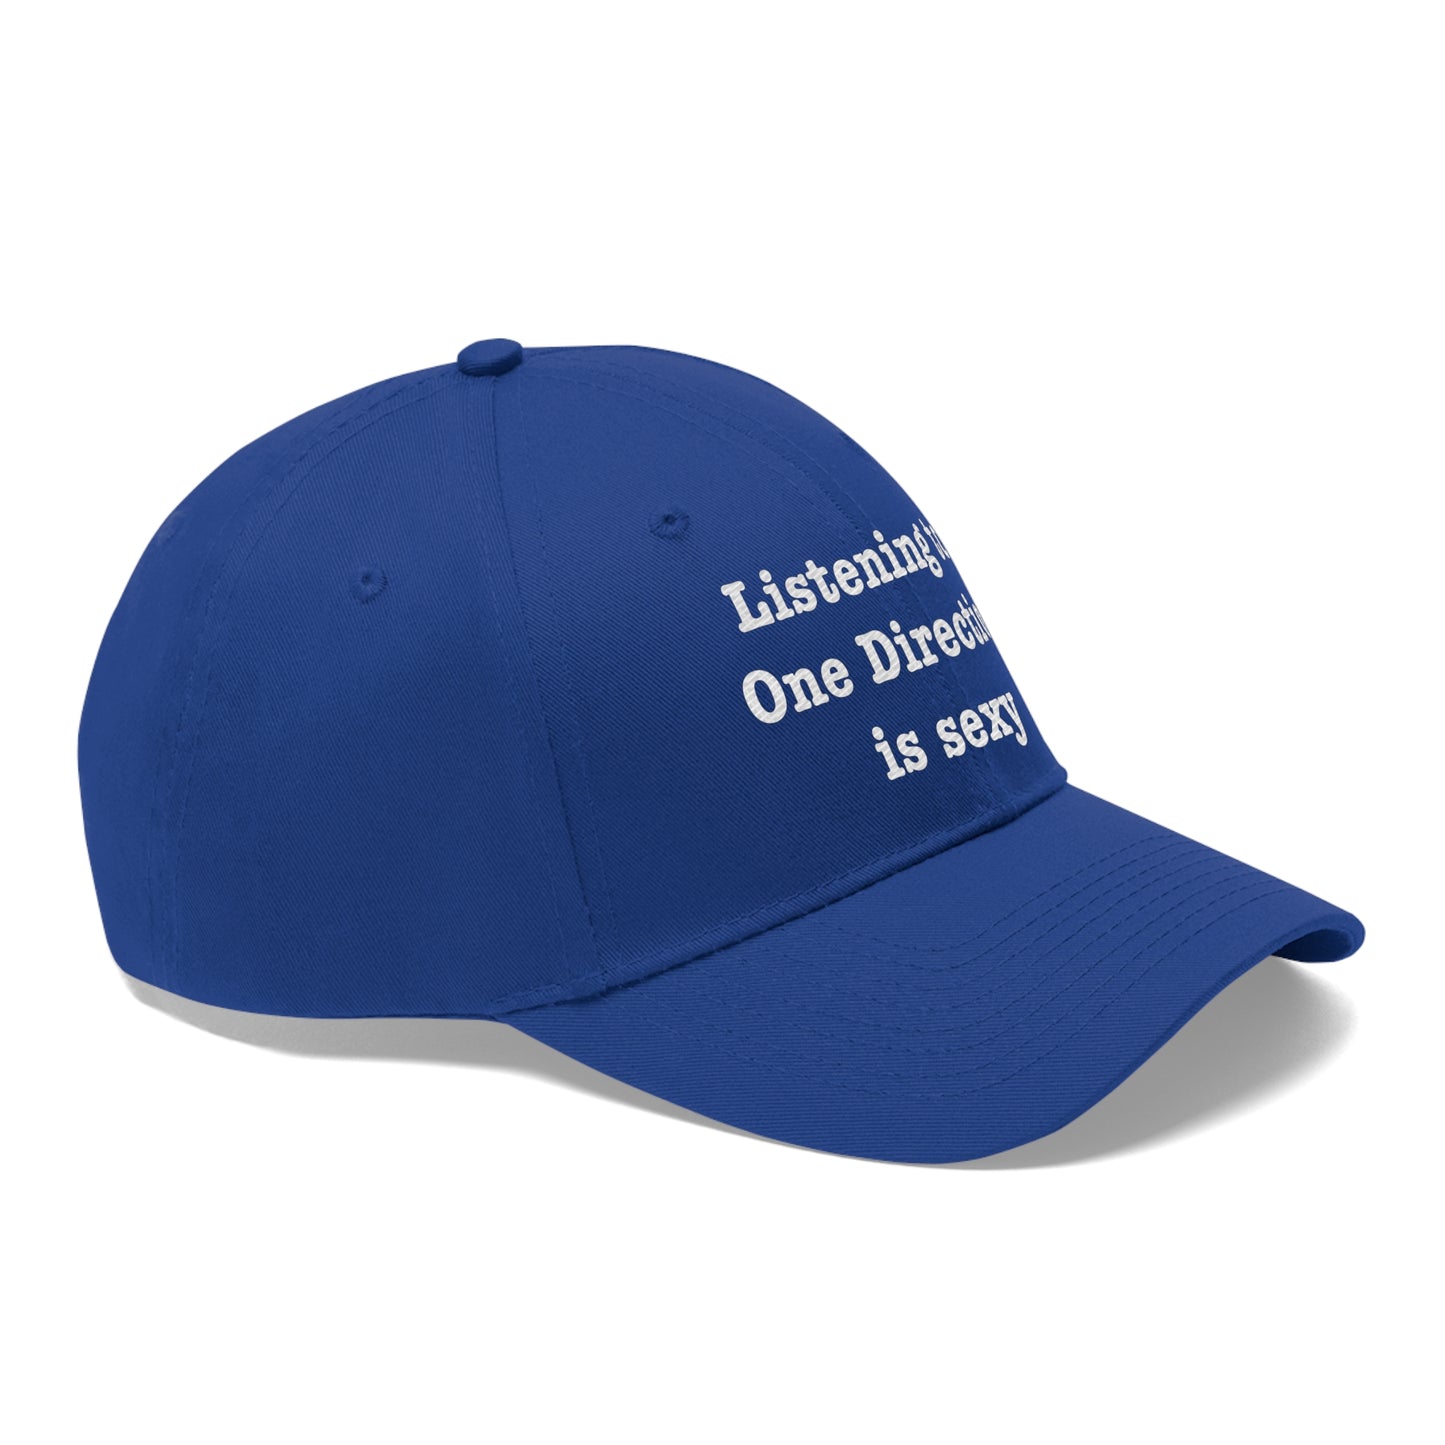 Listening to One Direction is sexy hat